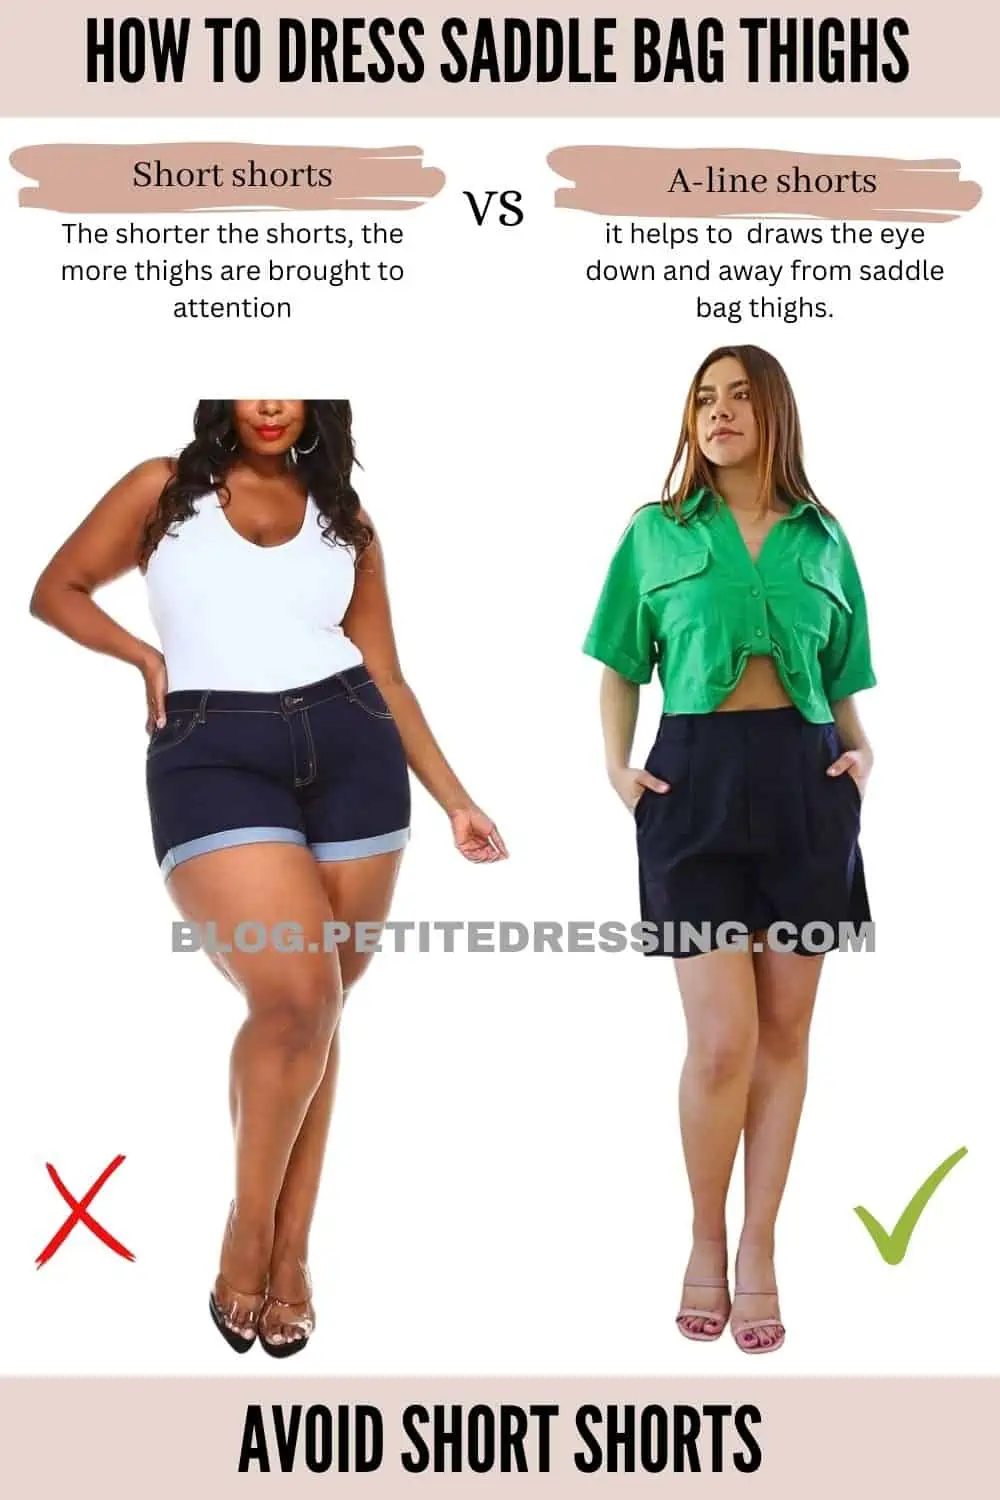 The Complete Style Guide for Women with Saddle Bag Thighs - Petite